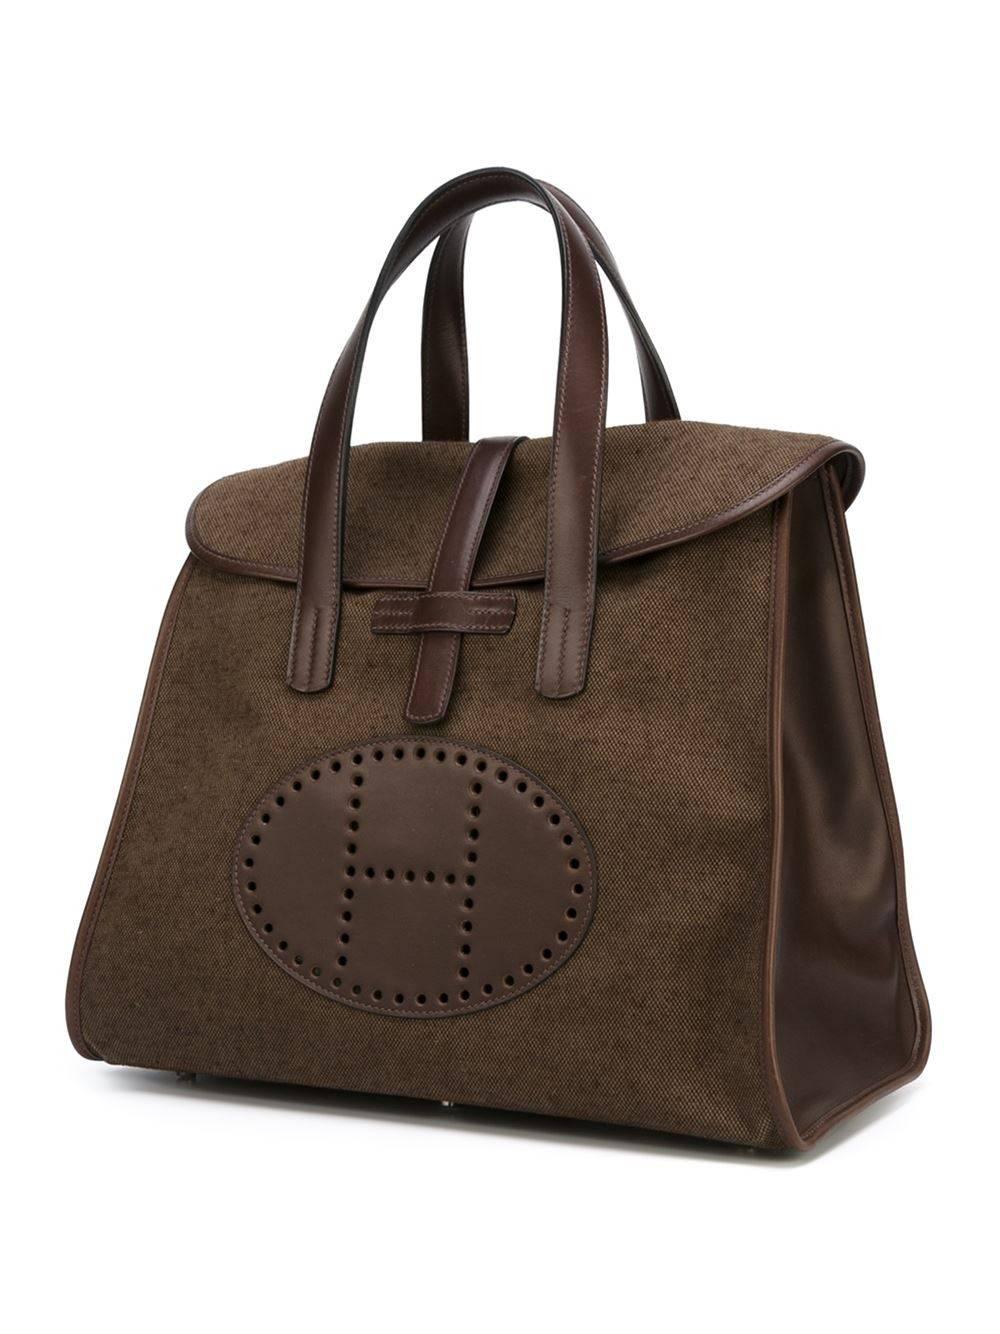 Gorgeous & Rare Hermès Fendou handbag of 2002. Made of brown/kaki canvas and brown leather. Excellent condition. Never used. Hermès Paris Made in France. Letter F in a square. 